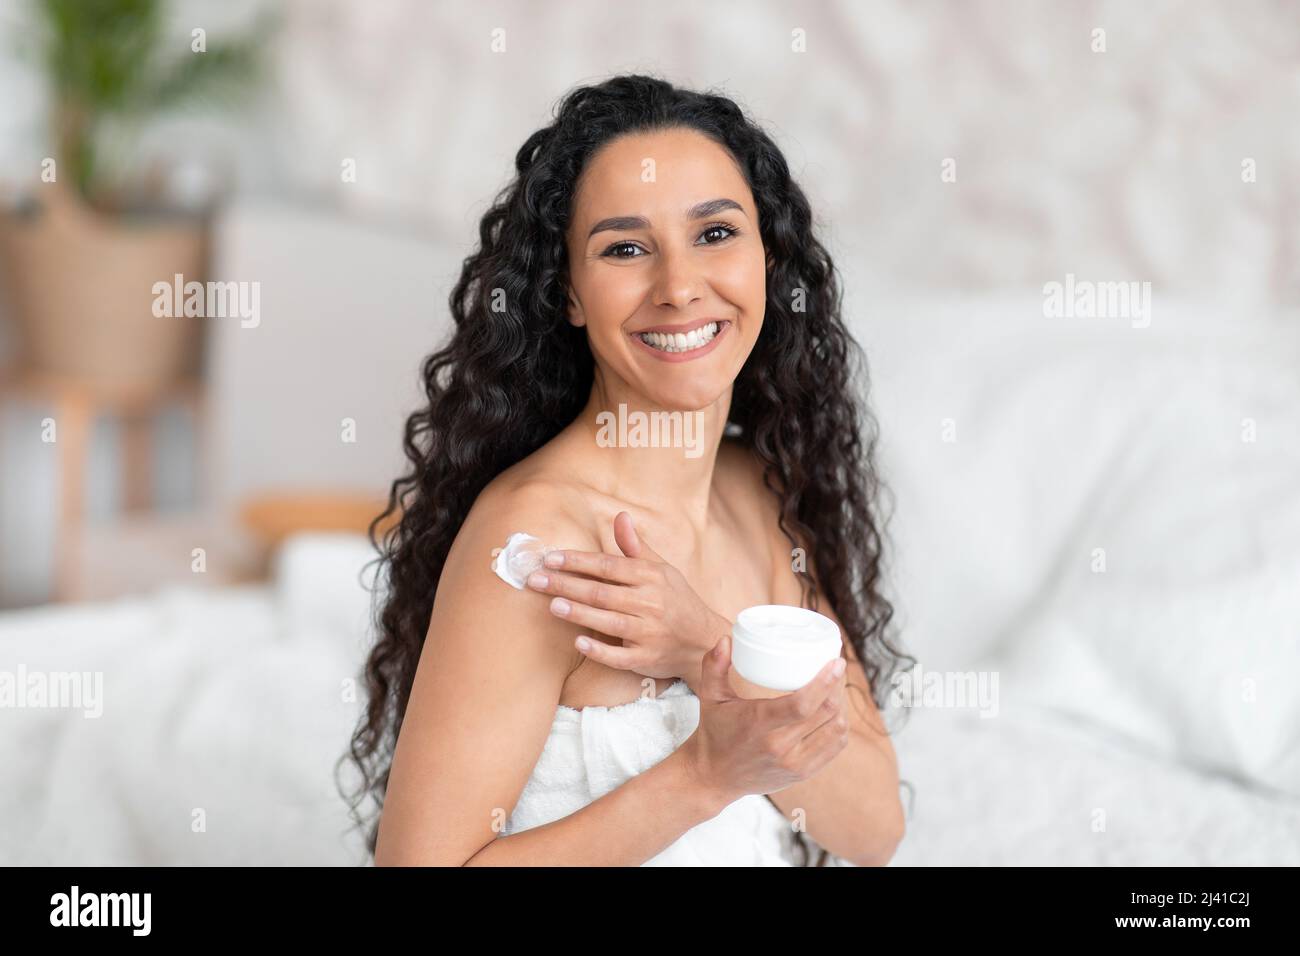 Smiling attractive millennial european brunette woman with long hair in towel applies cream on body in bedroom Stock Photo